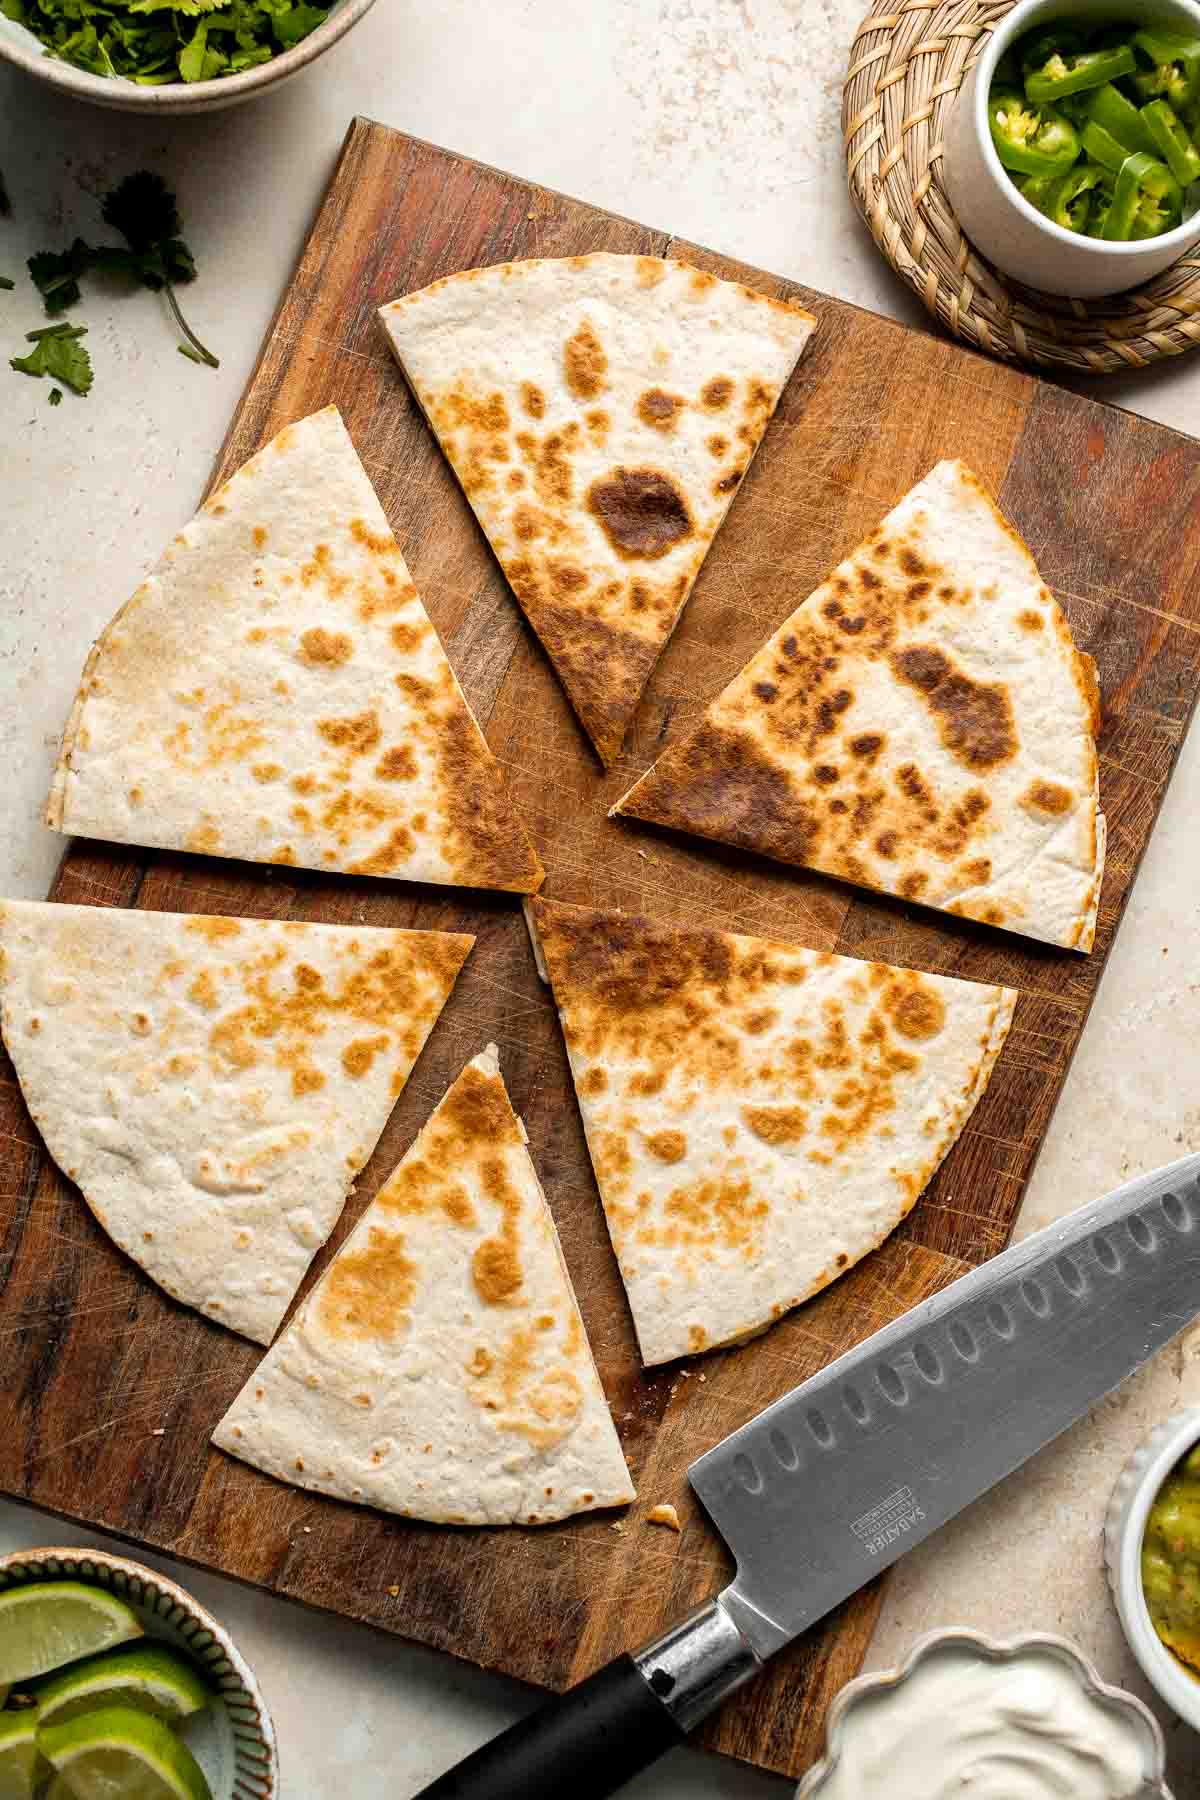 This Cheese Quesadilla has the perfect combination of crispy, cheesy, and flavorful. Ready to serve in just a few minutes with your favorite toppings. | aheadofthyme.com